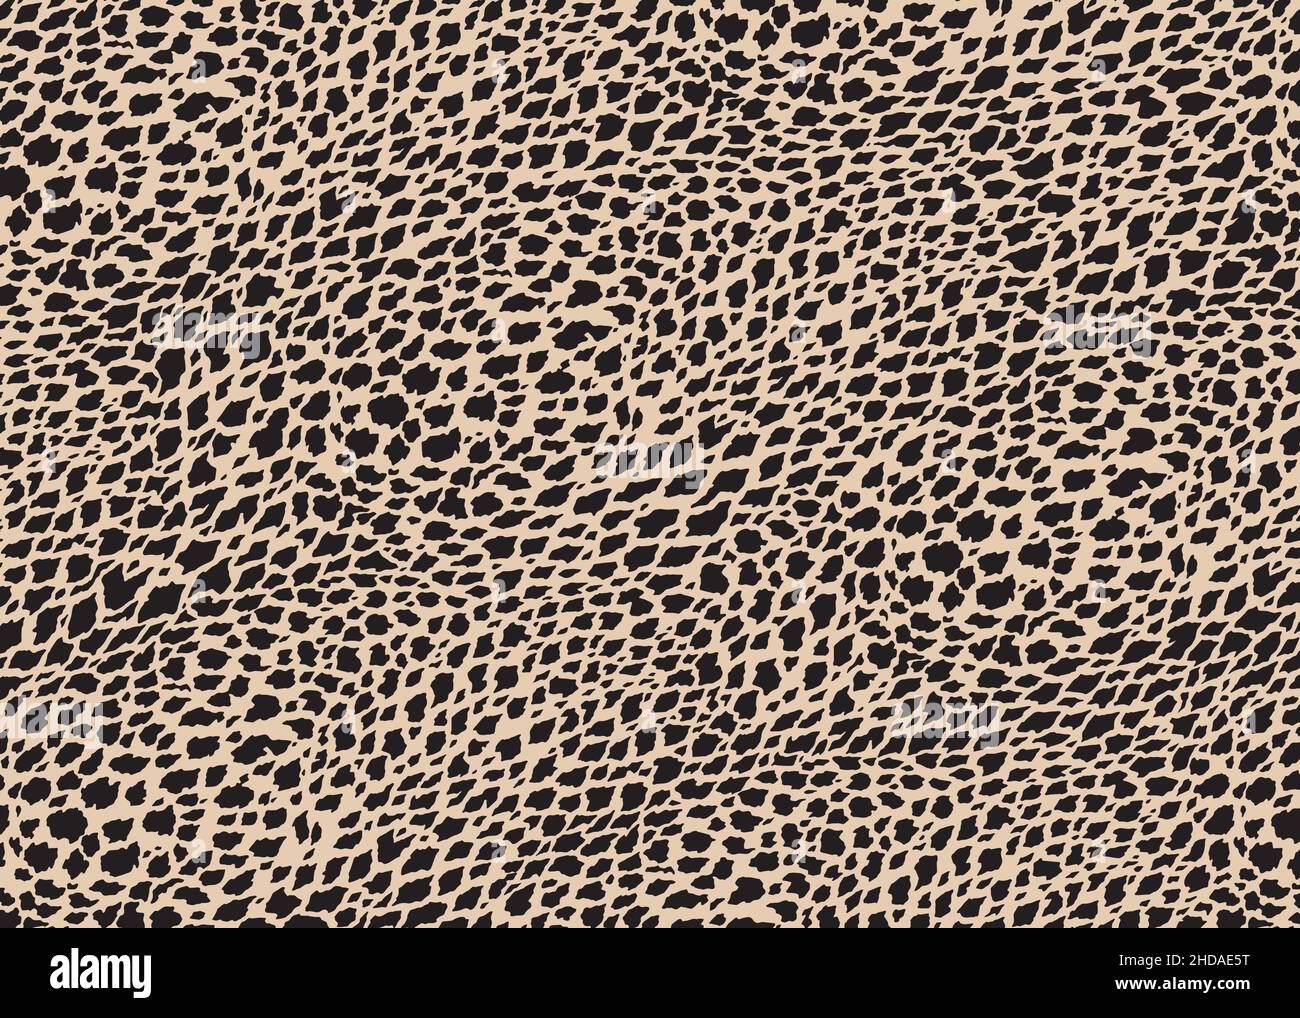 Cheetah skin pattern design. Vector illustration background. For print, textile, web, home decor, fashion, surface, graphic design Stock Vector